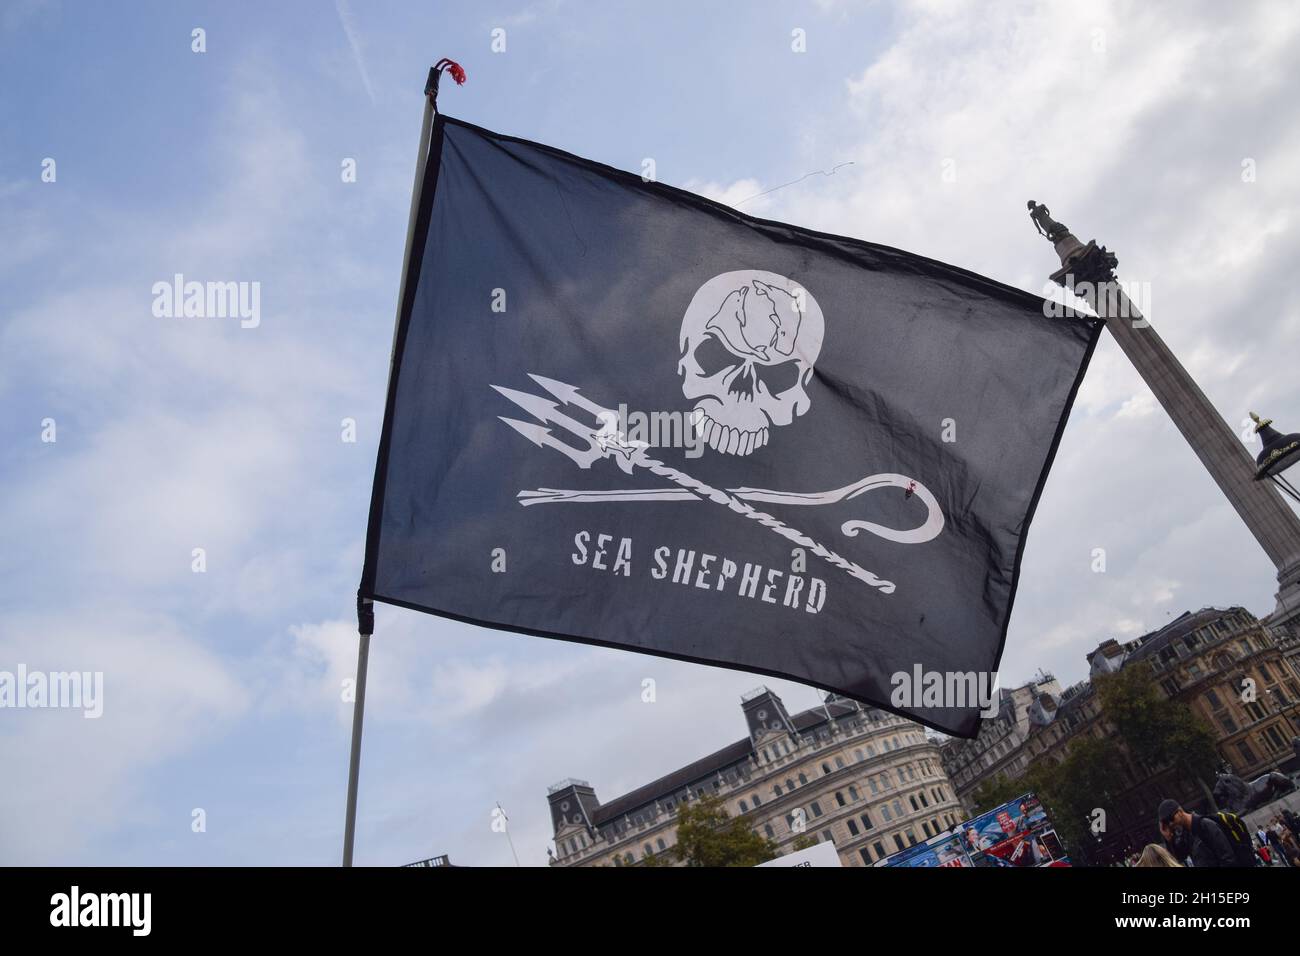 London, UK. 16th Oct, 2021. A Sea Shepherd flag is seen during the demonstration in Trafalgar Square.Members of marine conservation organization Sea Shepherd and other activists marched through Westminster, calling for an end to the slaughter of dolphins in Faroe Islands and Taiji, Japan. Credit: SOPA Images Limited/Alamy Live News Stock Photo